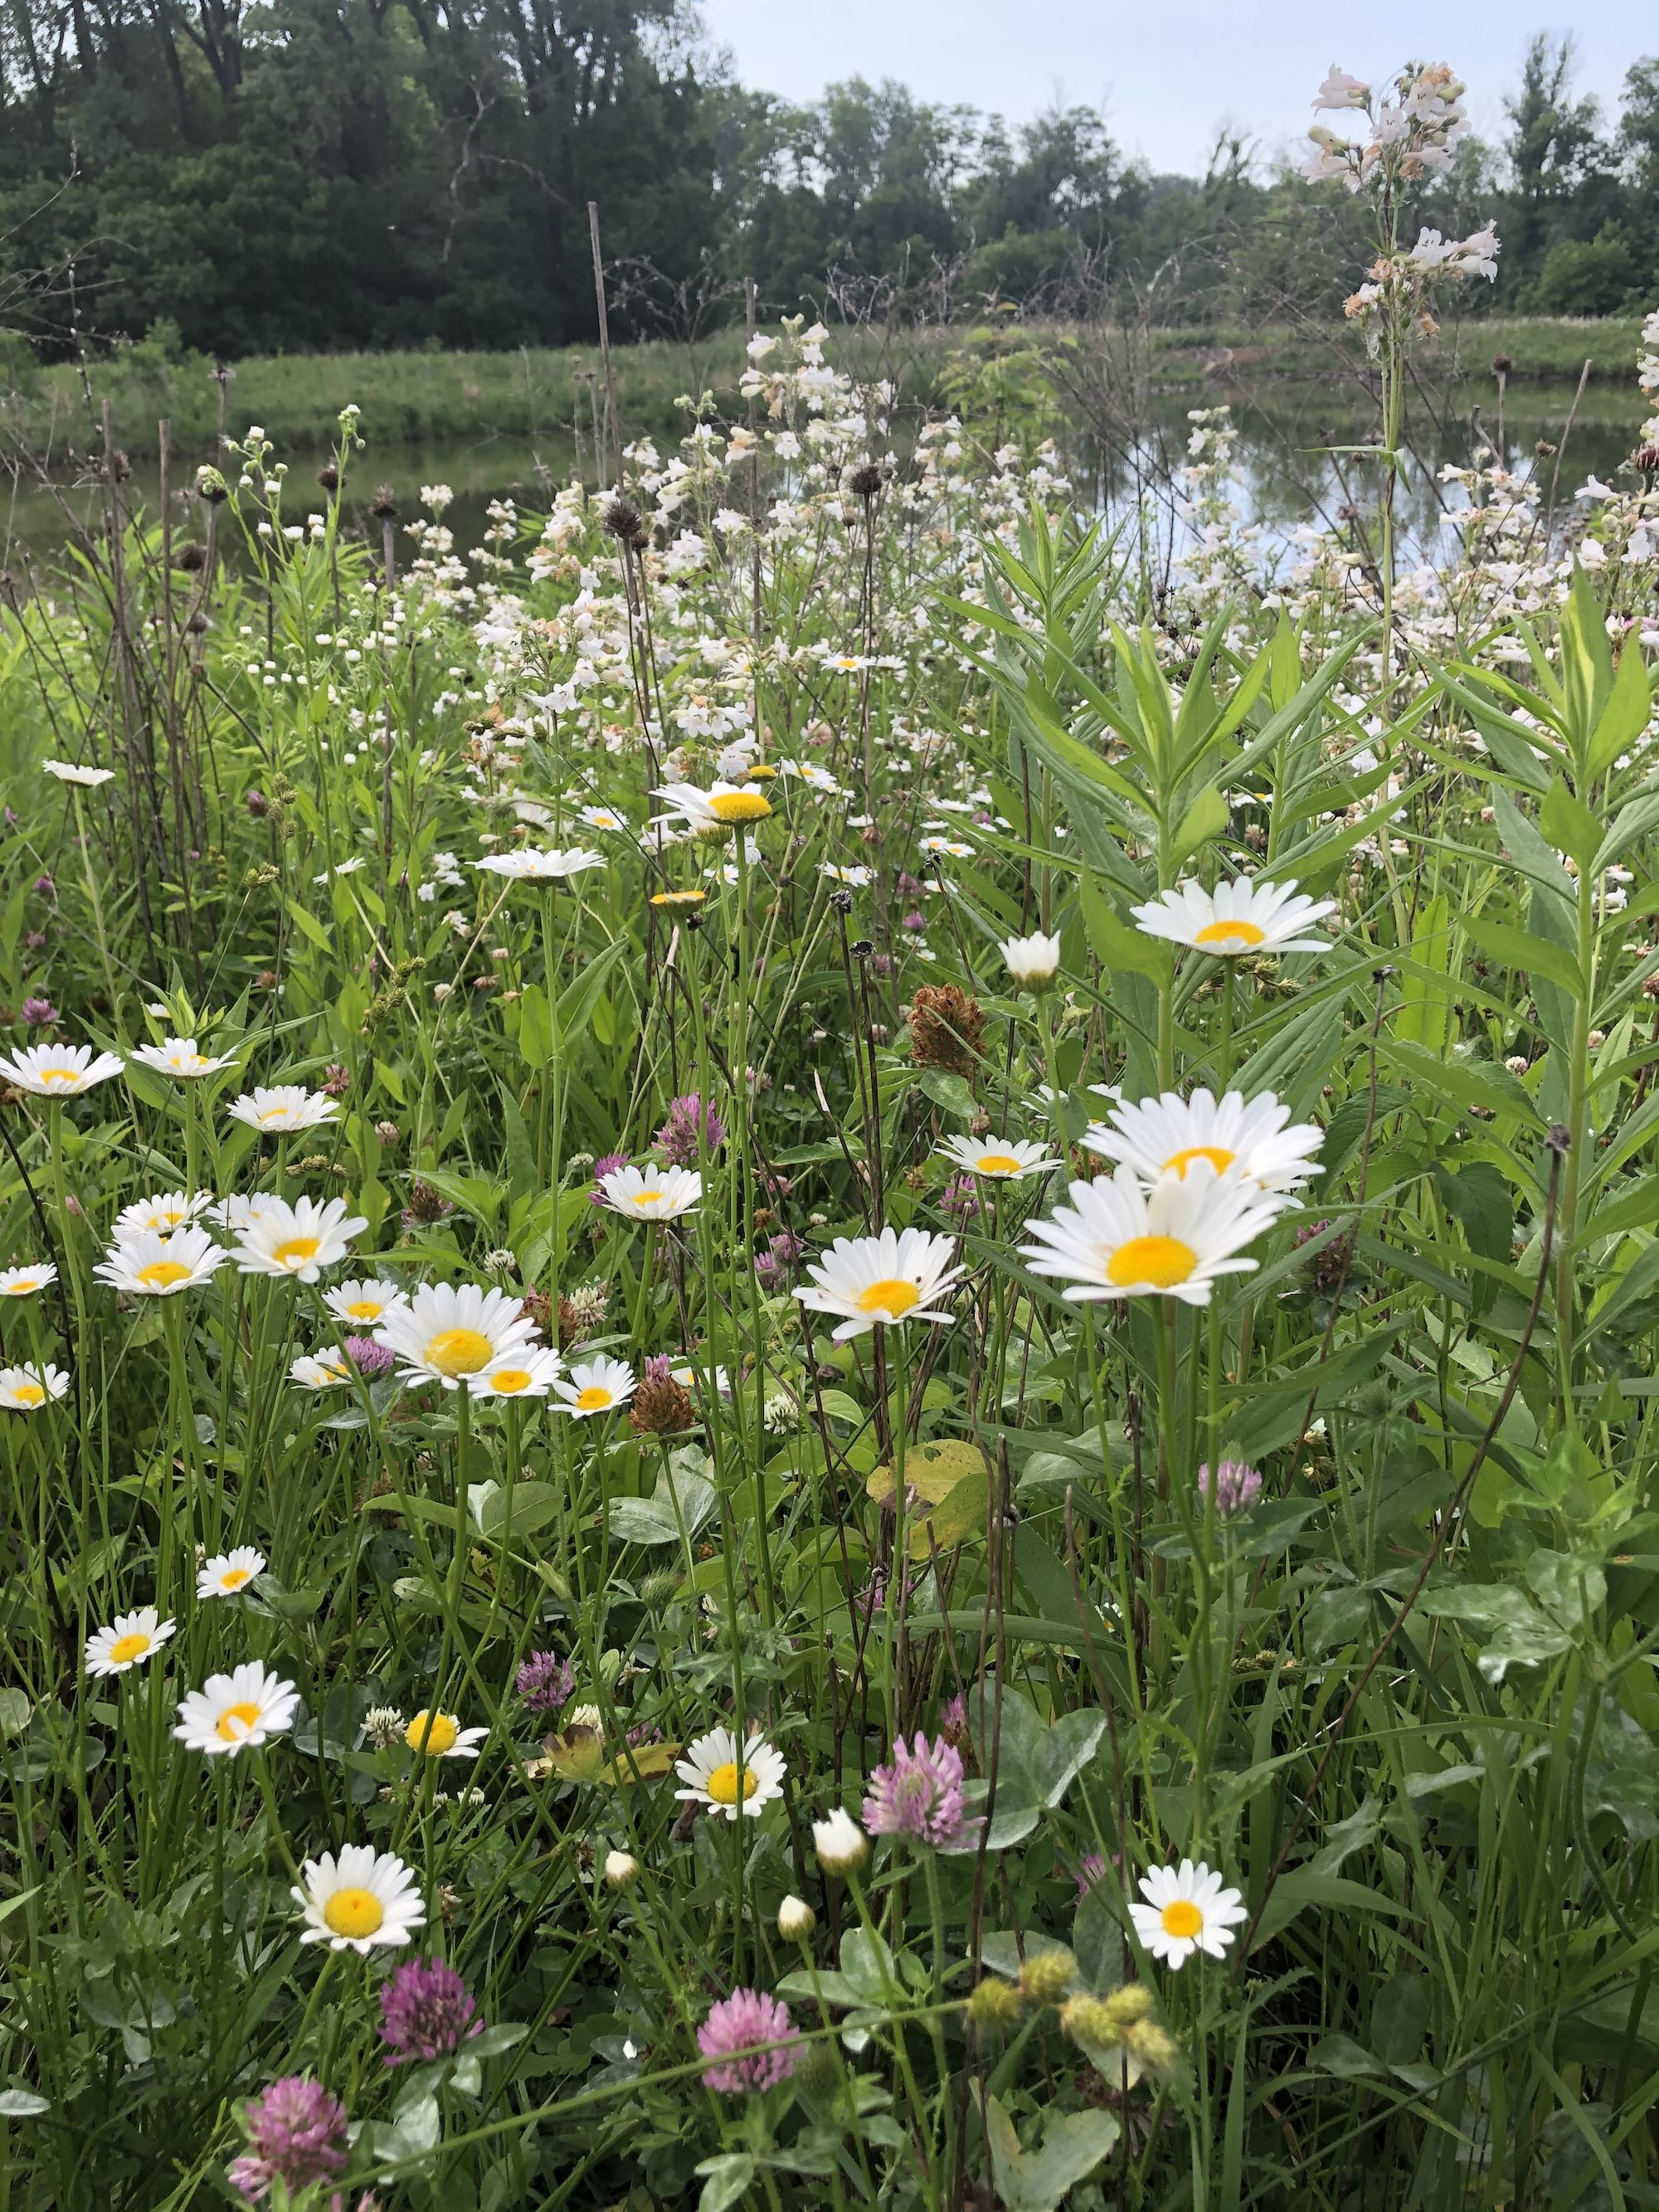 Ox-eye Daisies with Foxglove Beardtoungue on bank of retaining pond in Madison, Wisconsin on June 19, 2020.